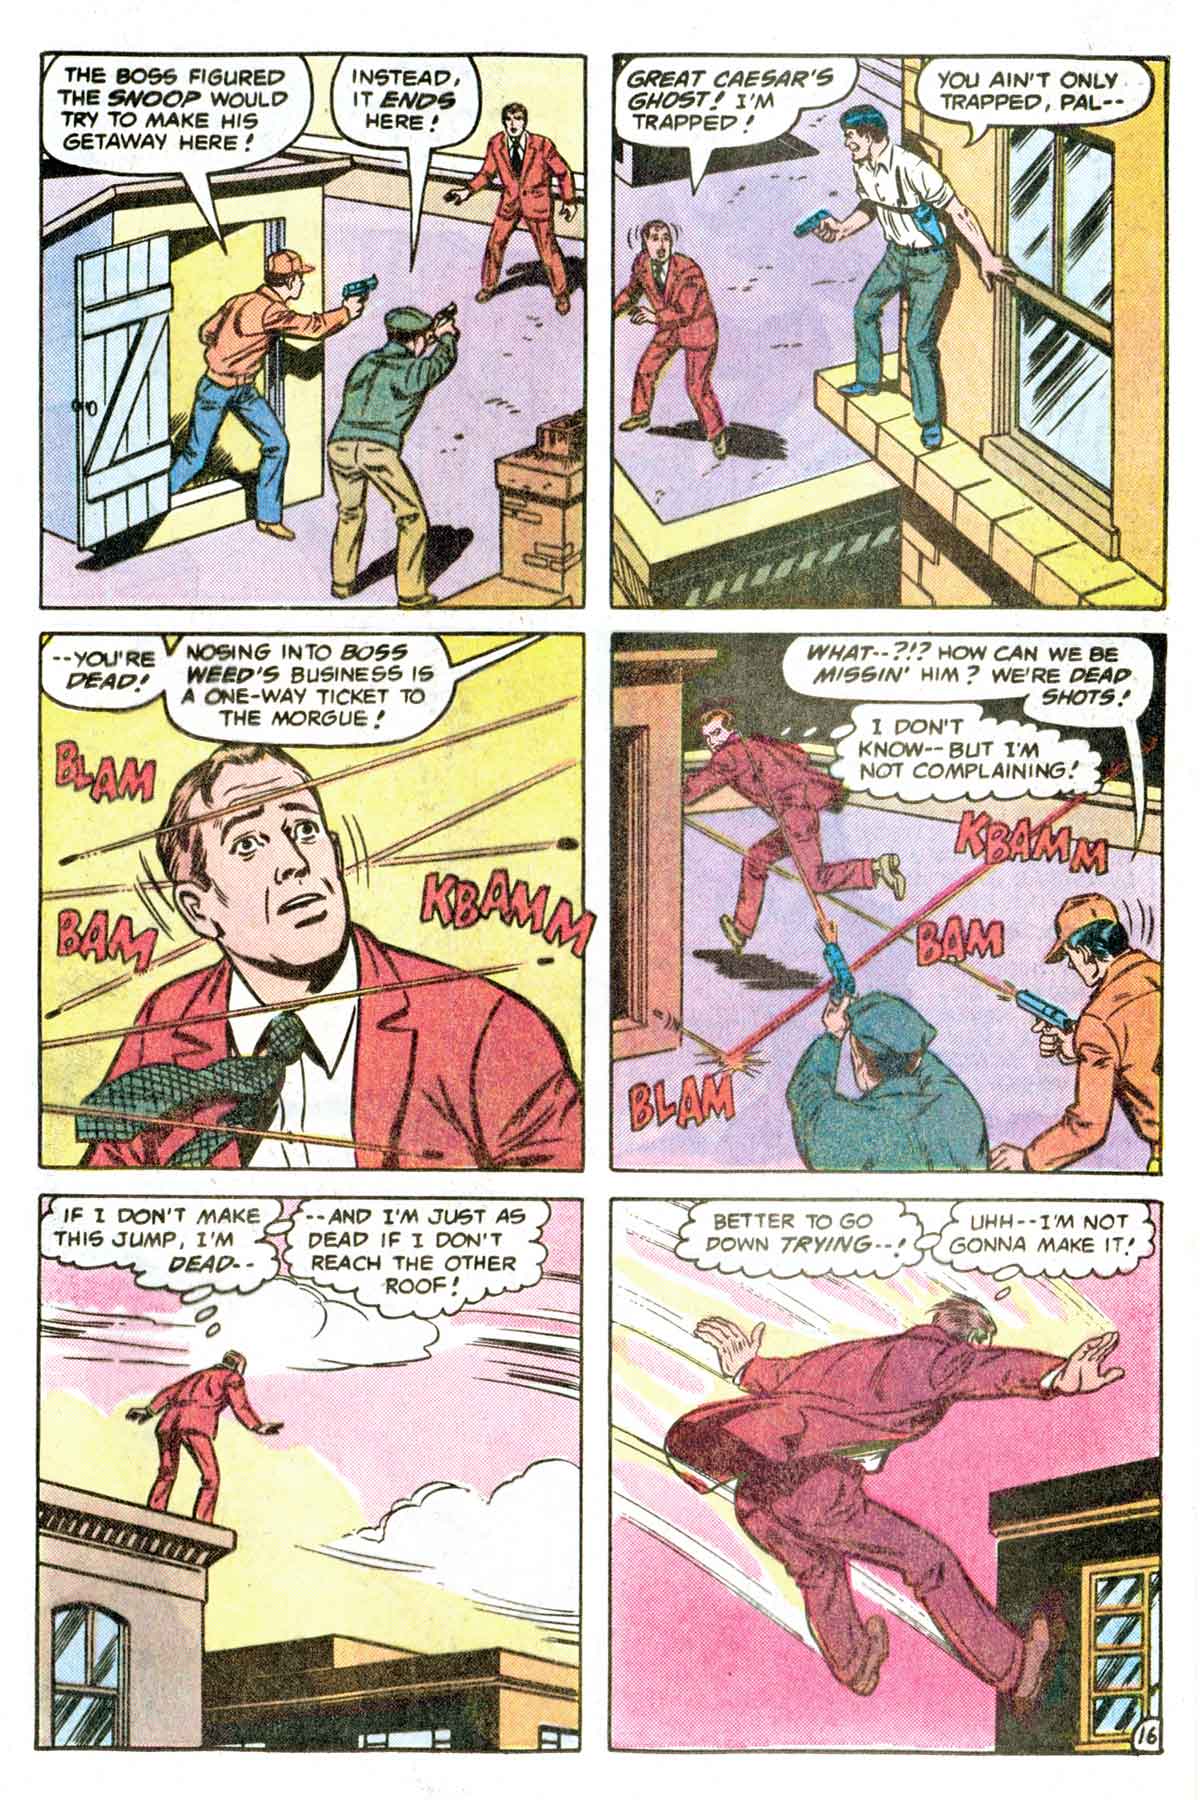 The New Adventures of Superboy 51 Page 16